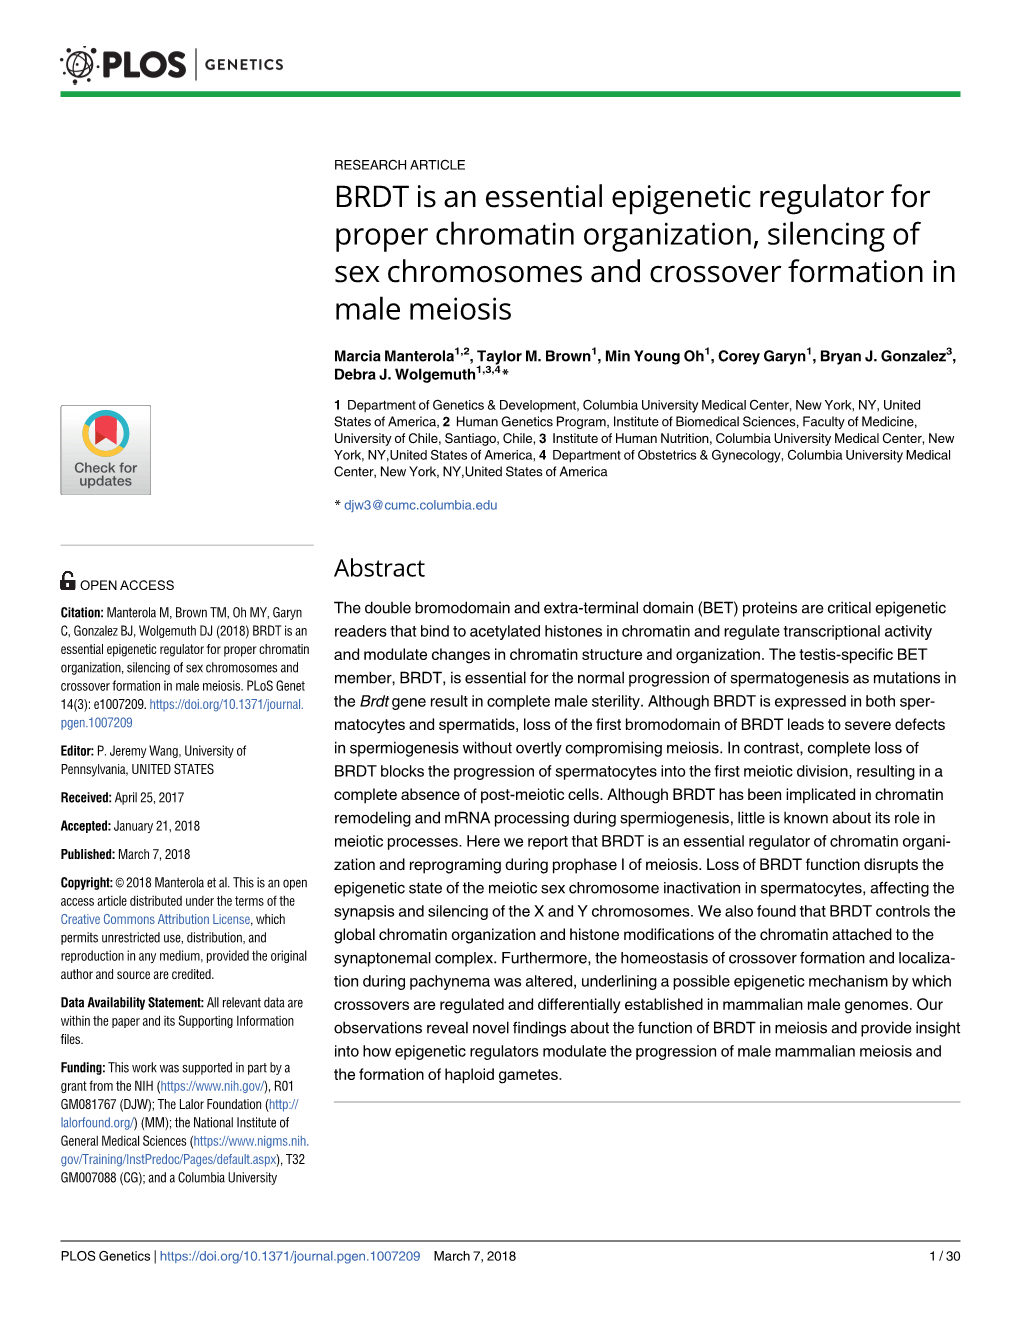 BRDT Is an Essential Epigenetic Regulator for Proper Chromatin Organization, Silencing of Sex Chromosomes and Crossover Formation in Male Meiosis